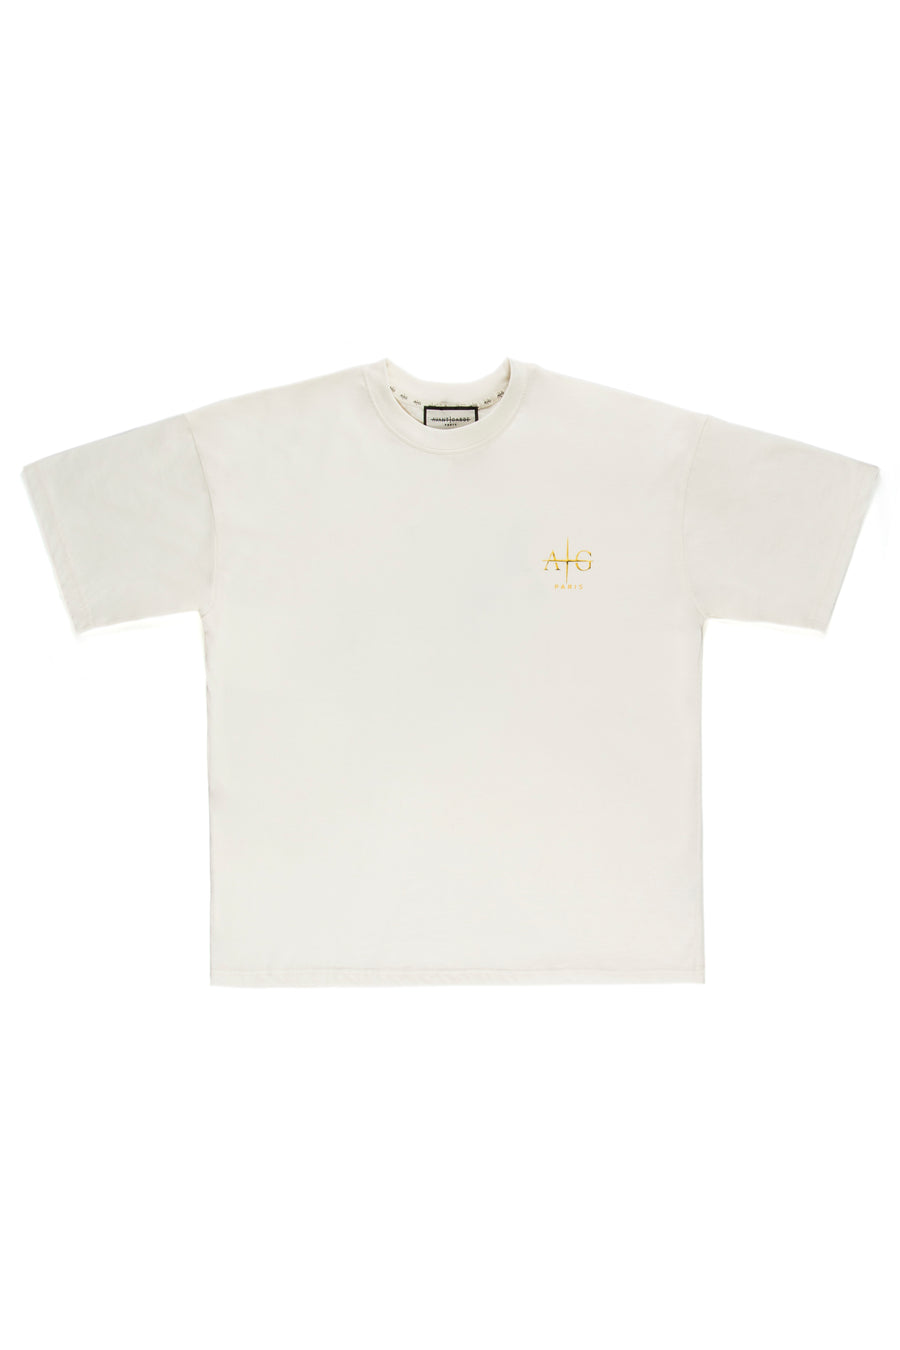 Front of white dove graphic tee